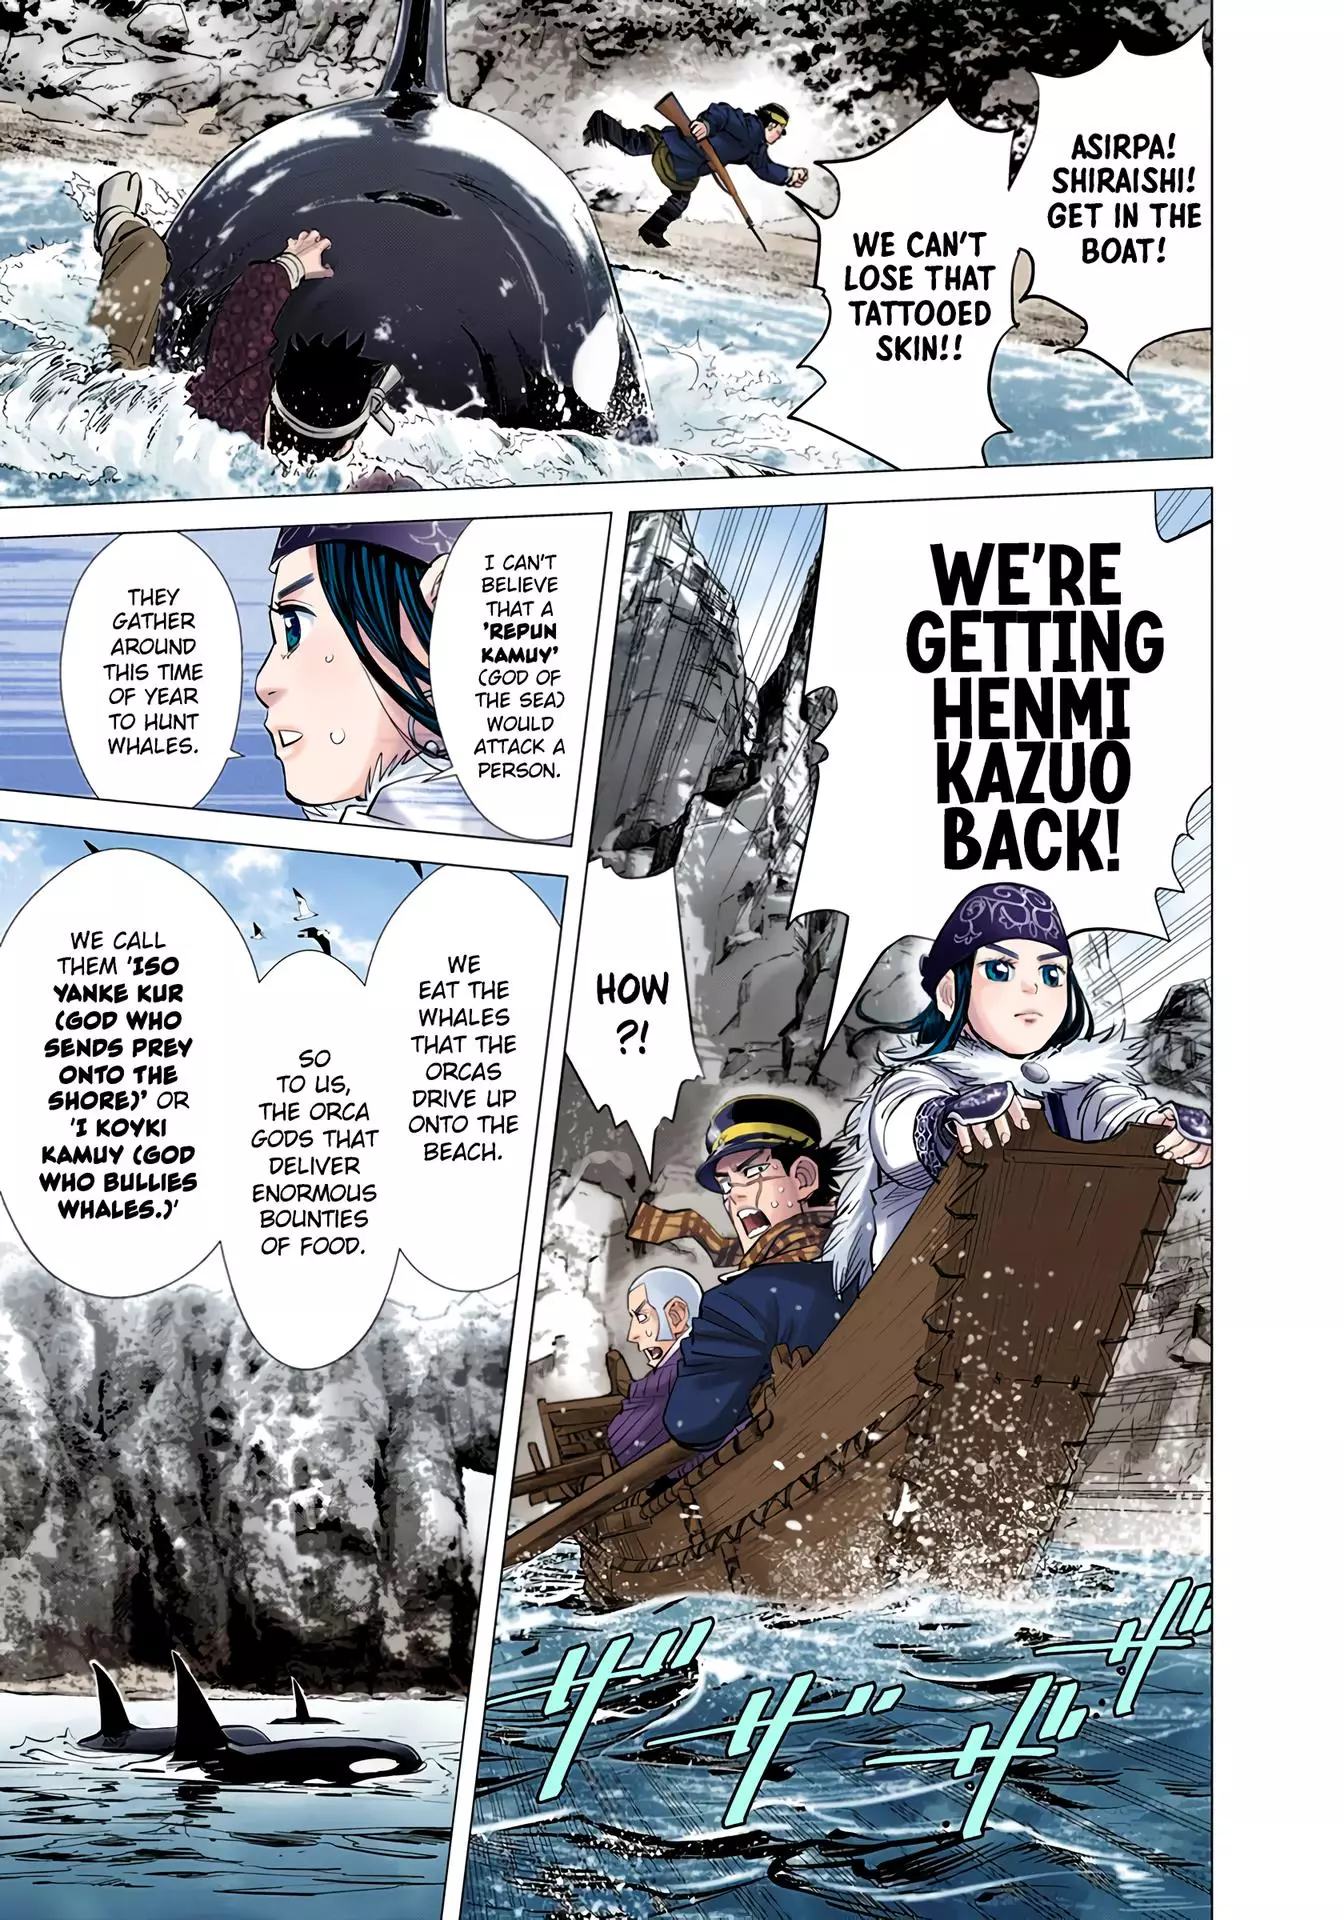 Golden Kamuy - Digital Colored Comics - 41 page 9-8dd2df19